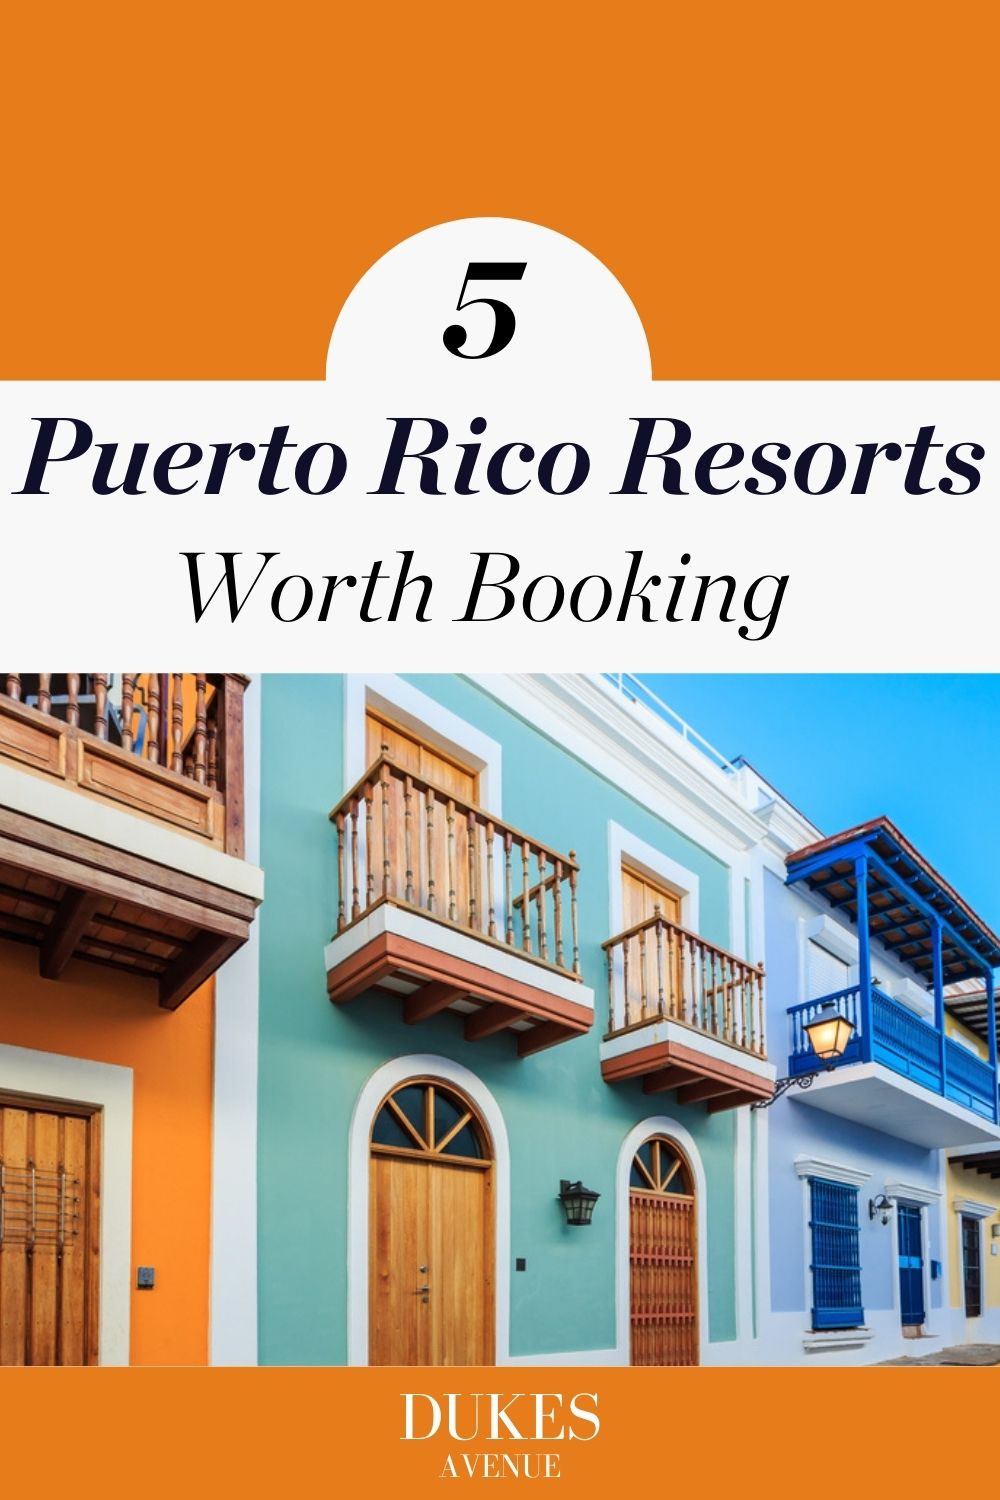 Image of colorful houses in Puerto Rico with text overlay '5 Puerto Rico Resorts Worth Booking'